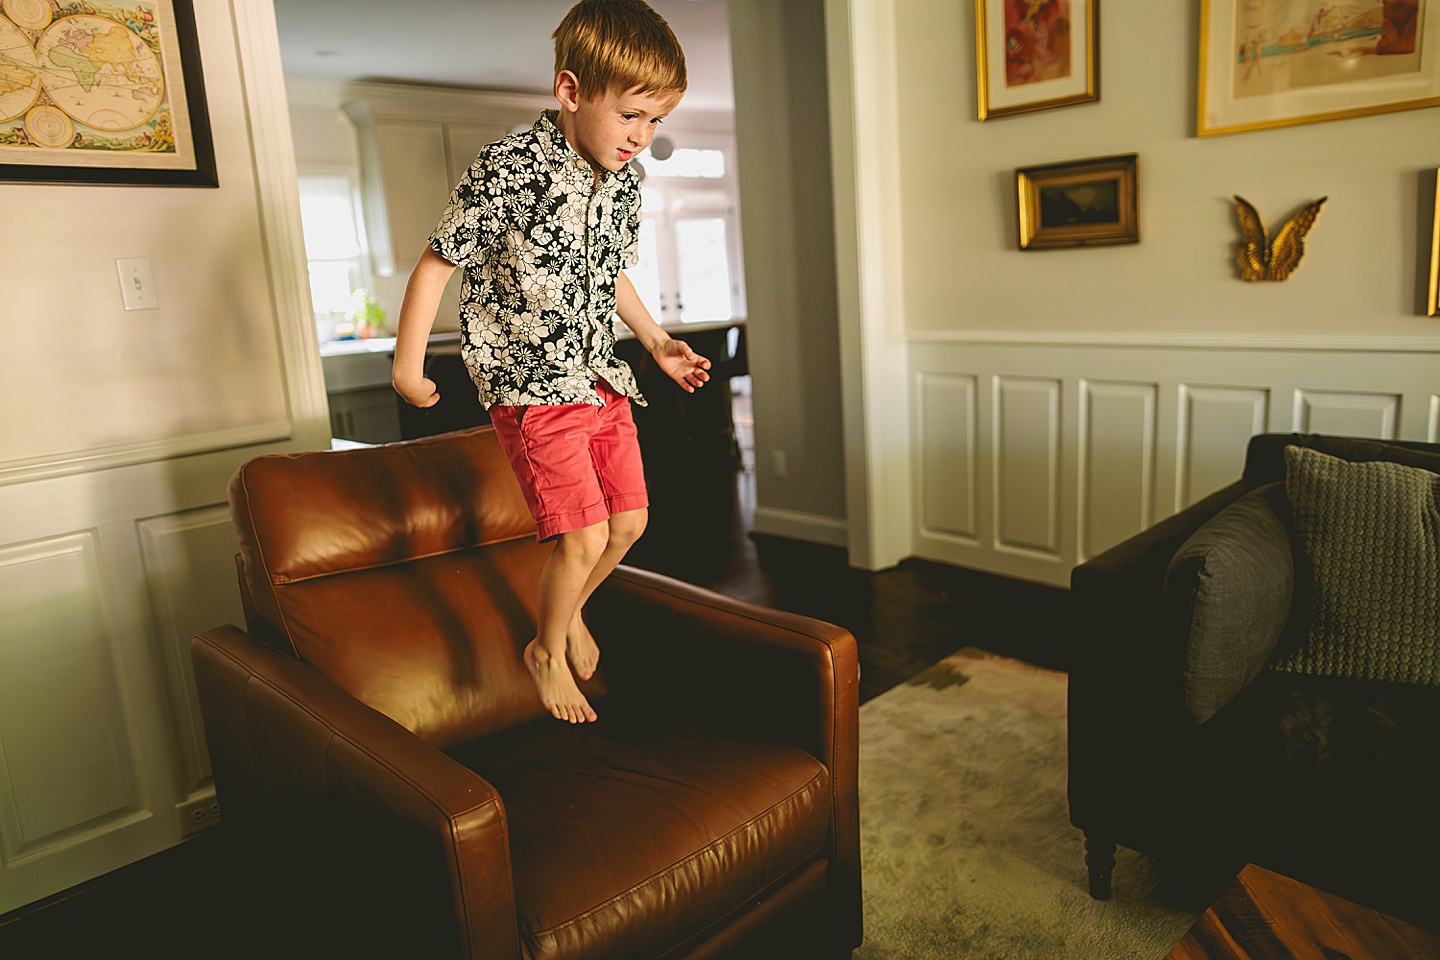 Boy jumping on living room furniture